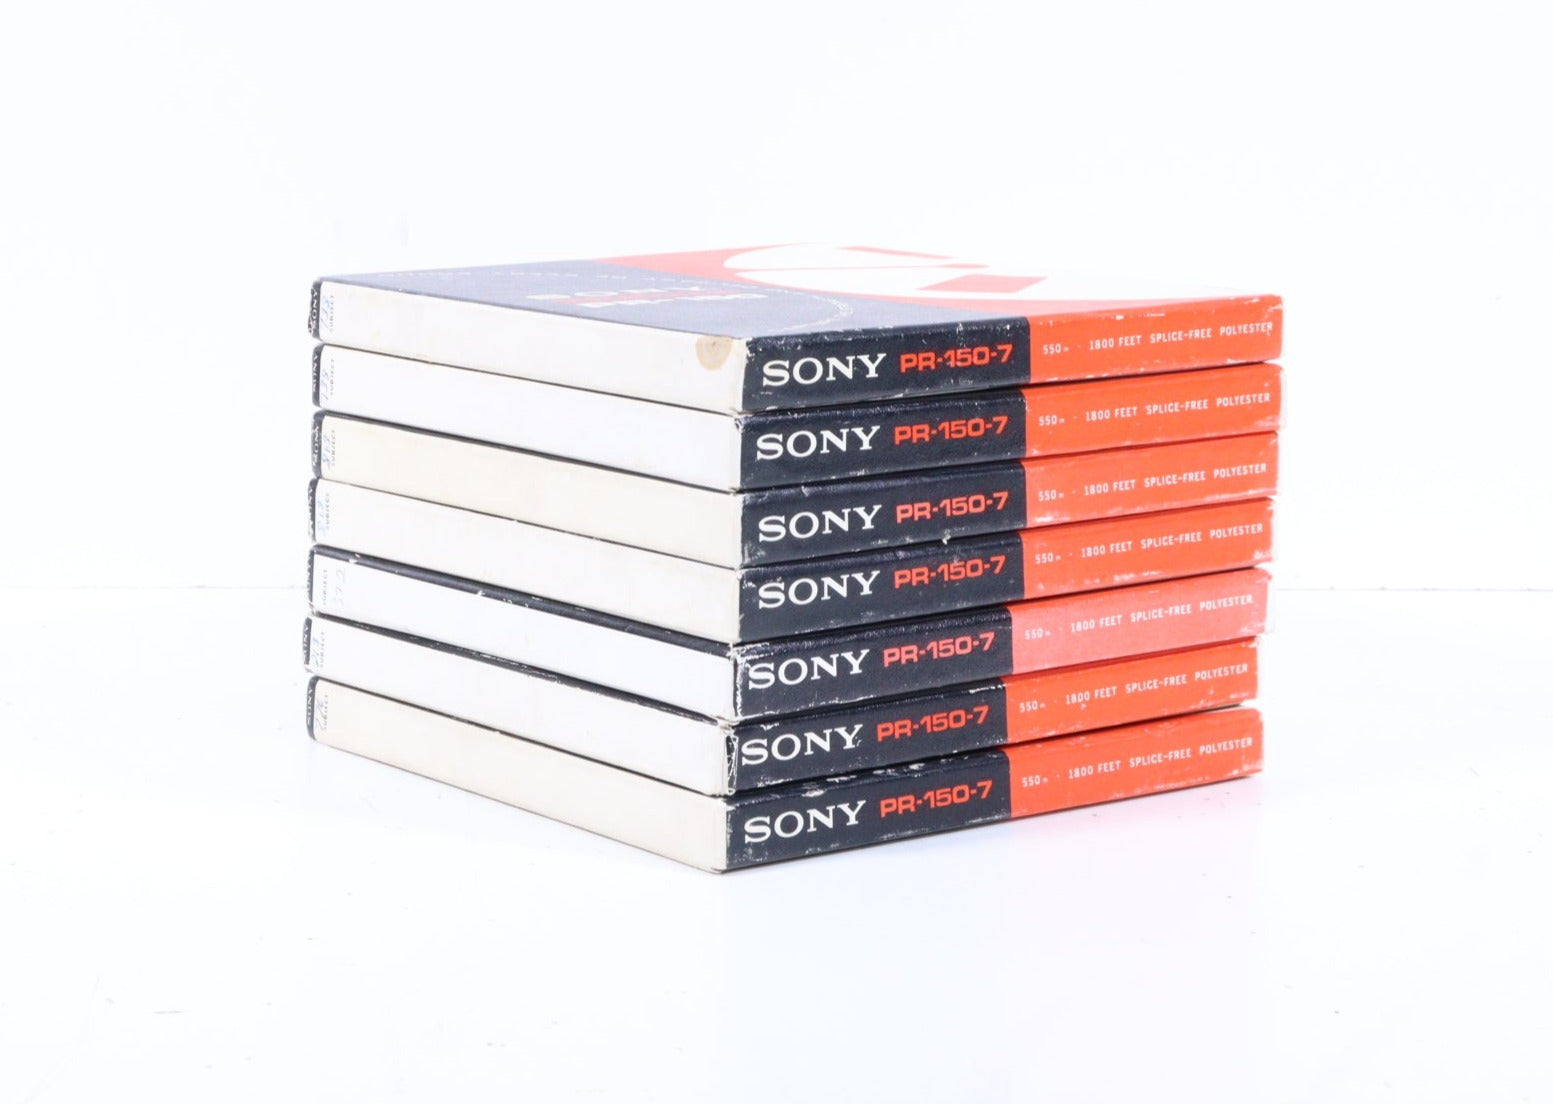 LOT OF 8 SONY PROFESSIONAL TAPE PR 7 Reel to Reel Tapes / SOLD AS